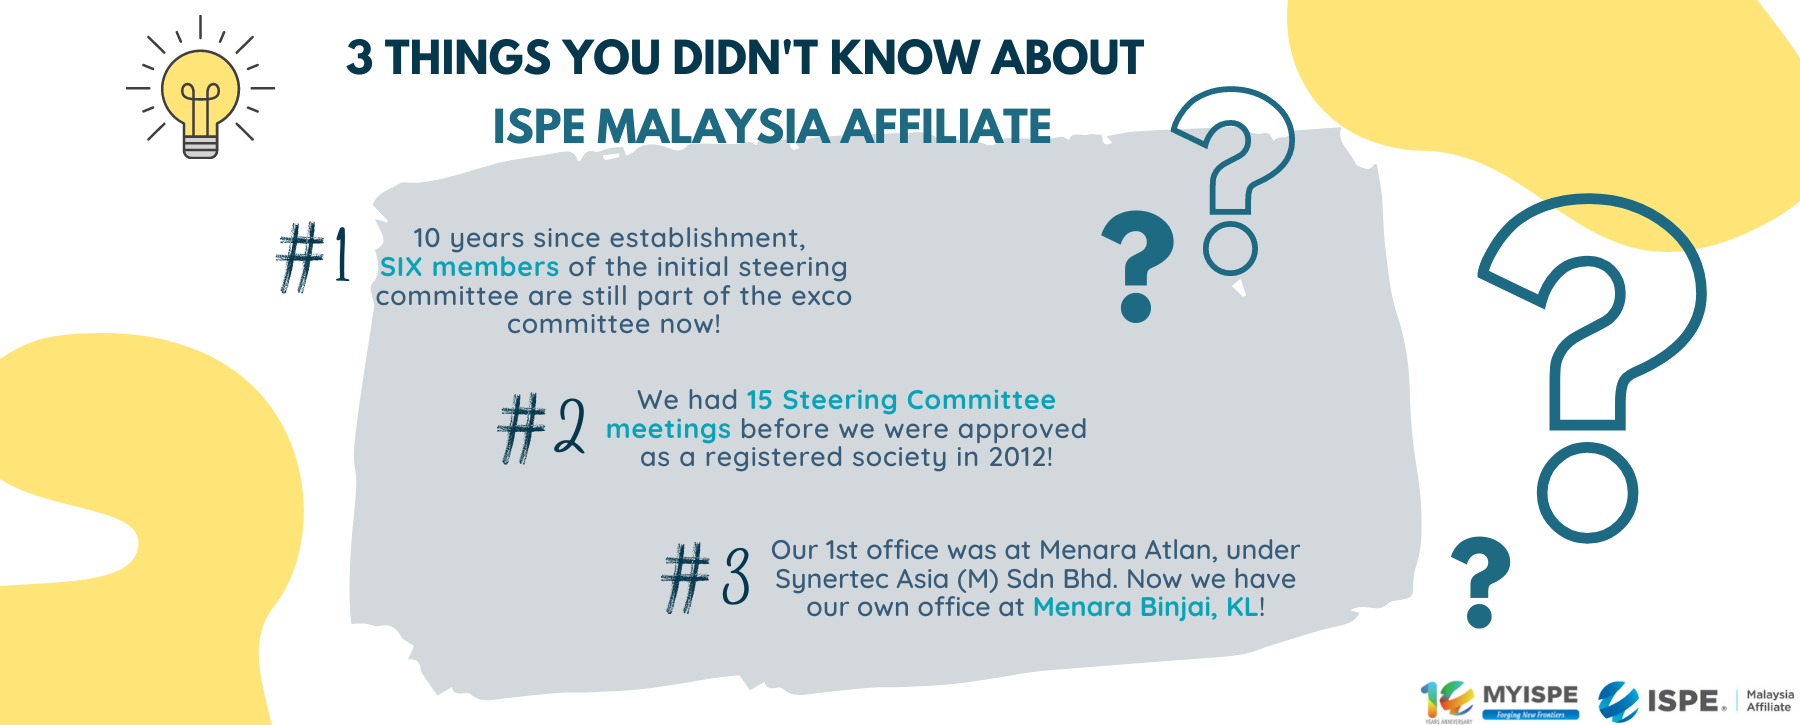 3 things you didnt know about ispe malaysia affiliate (1800 × 725 px) (2)